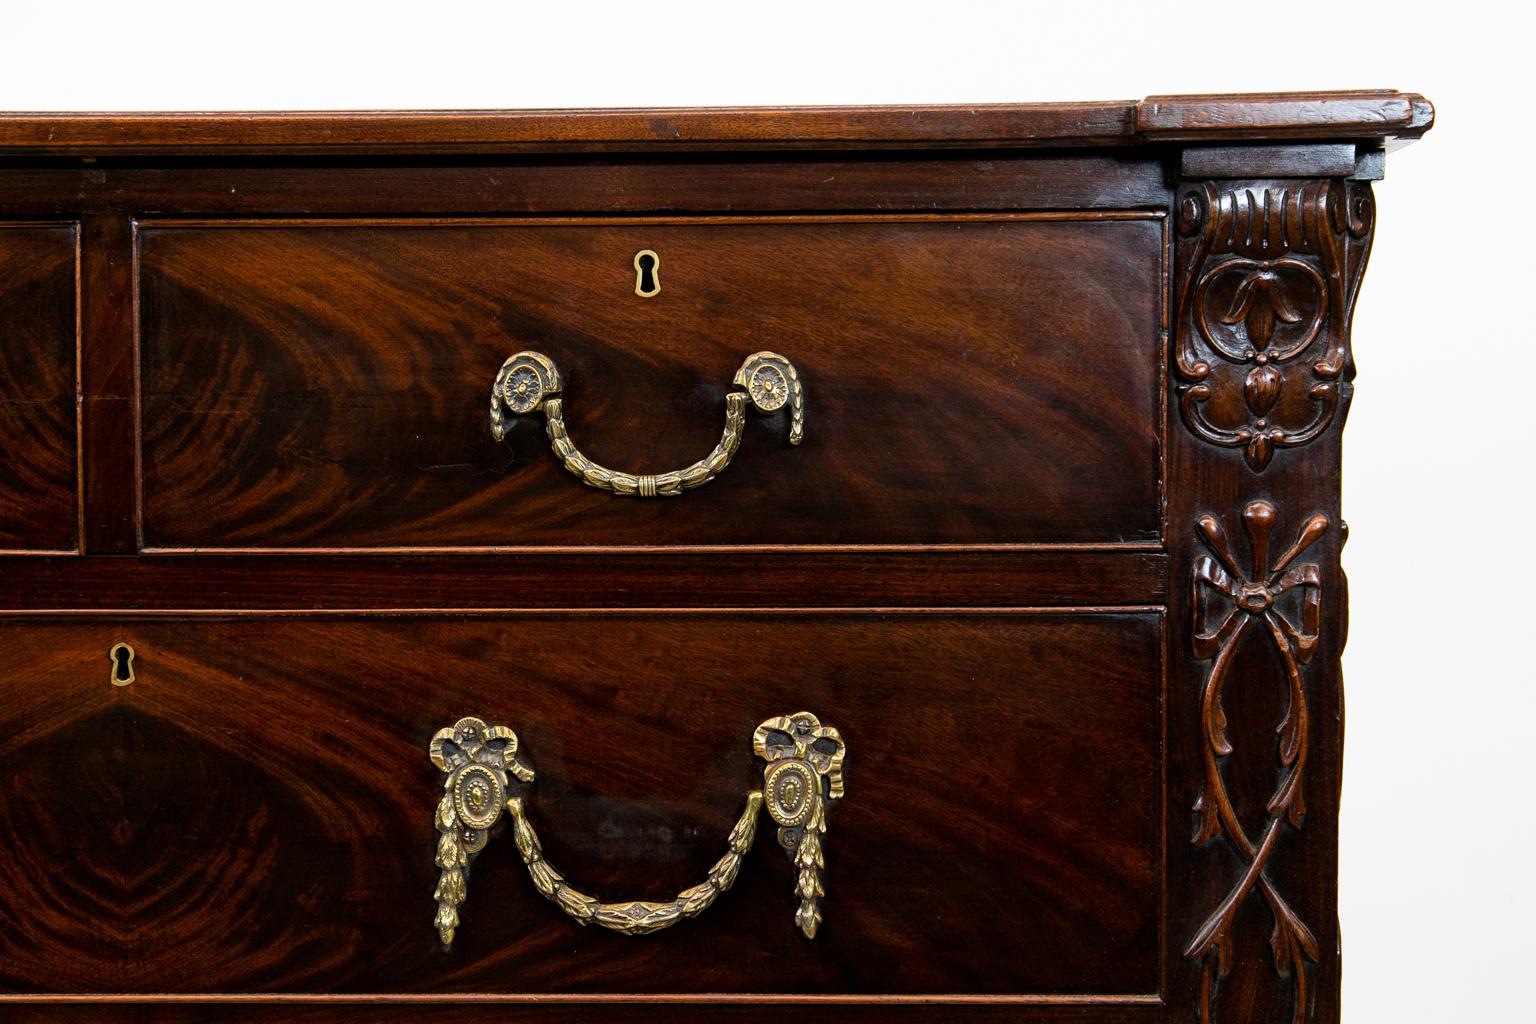 English mahogany William IV chest, with the front and stiles carved with ribbon and floral interfacing designs terminating in feet which are fluted and have a carved rosette, sides with inset panels. The handles are heavy cast brass with acanthus